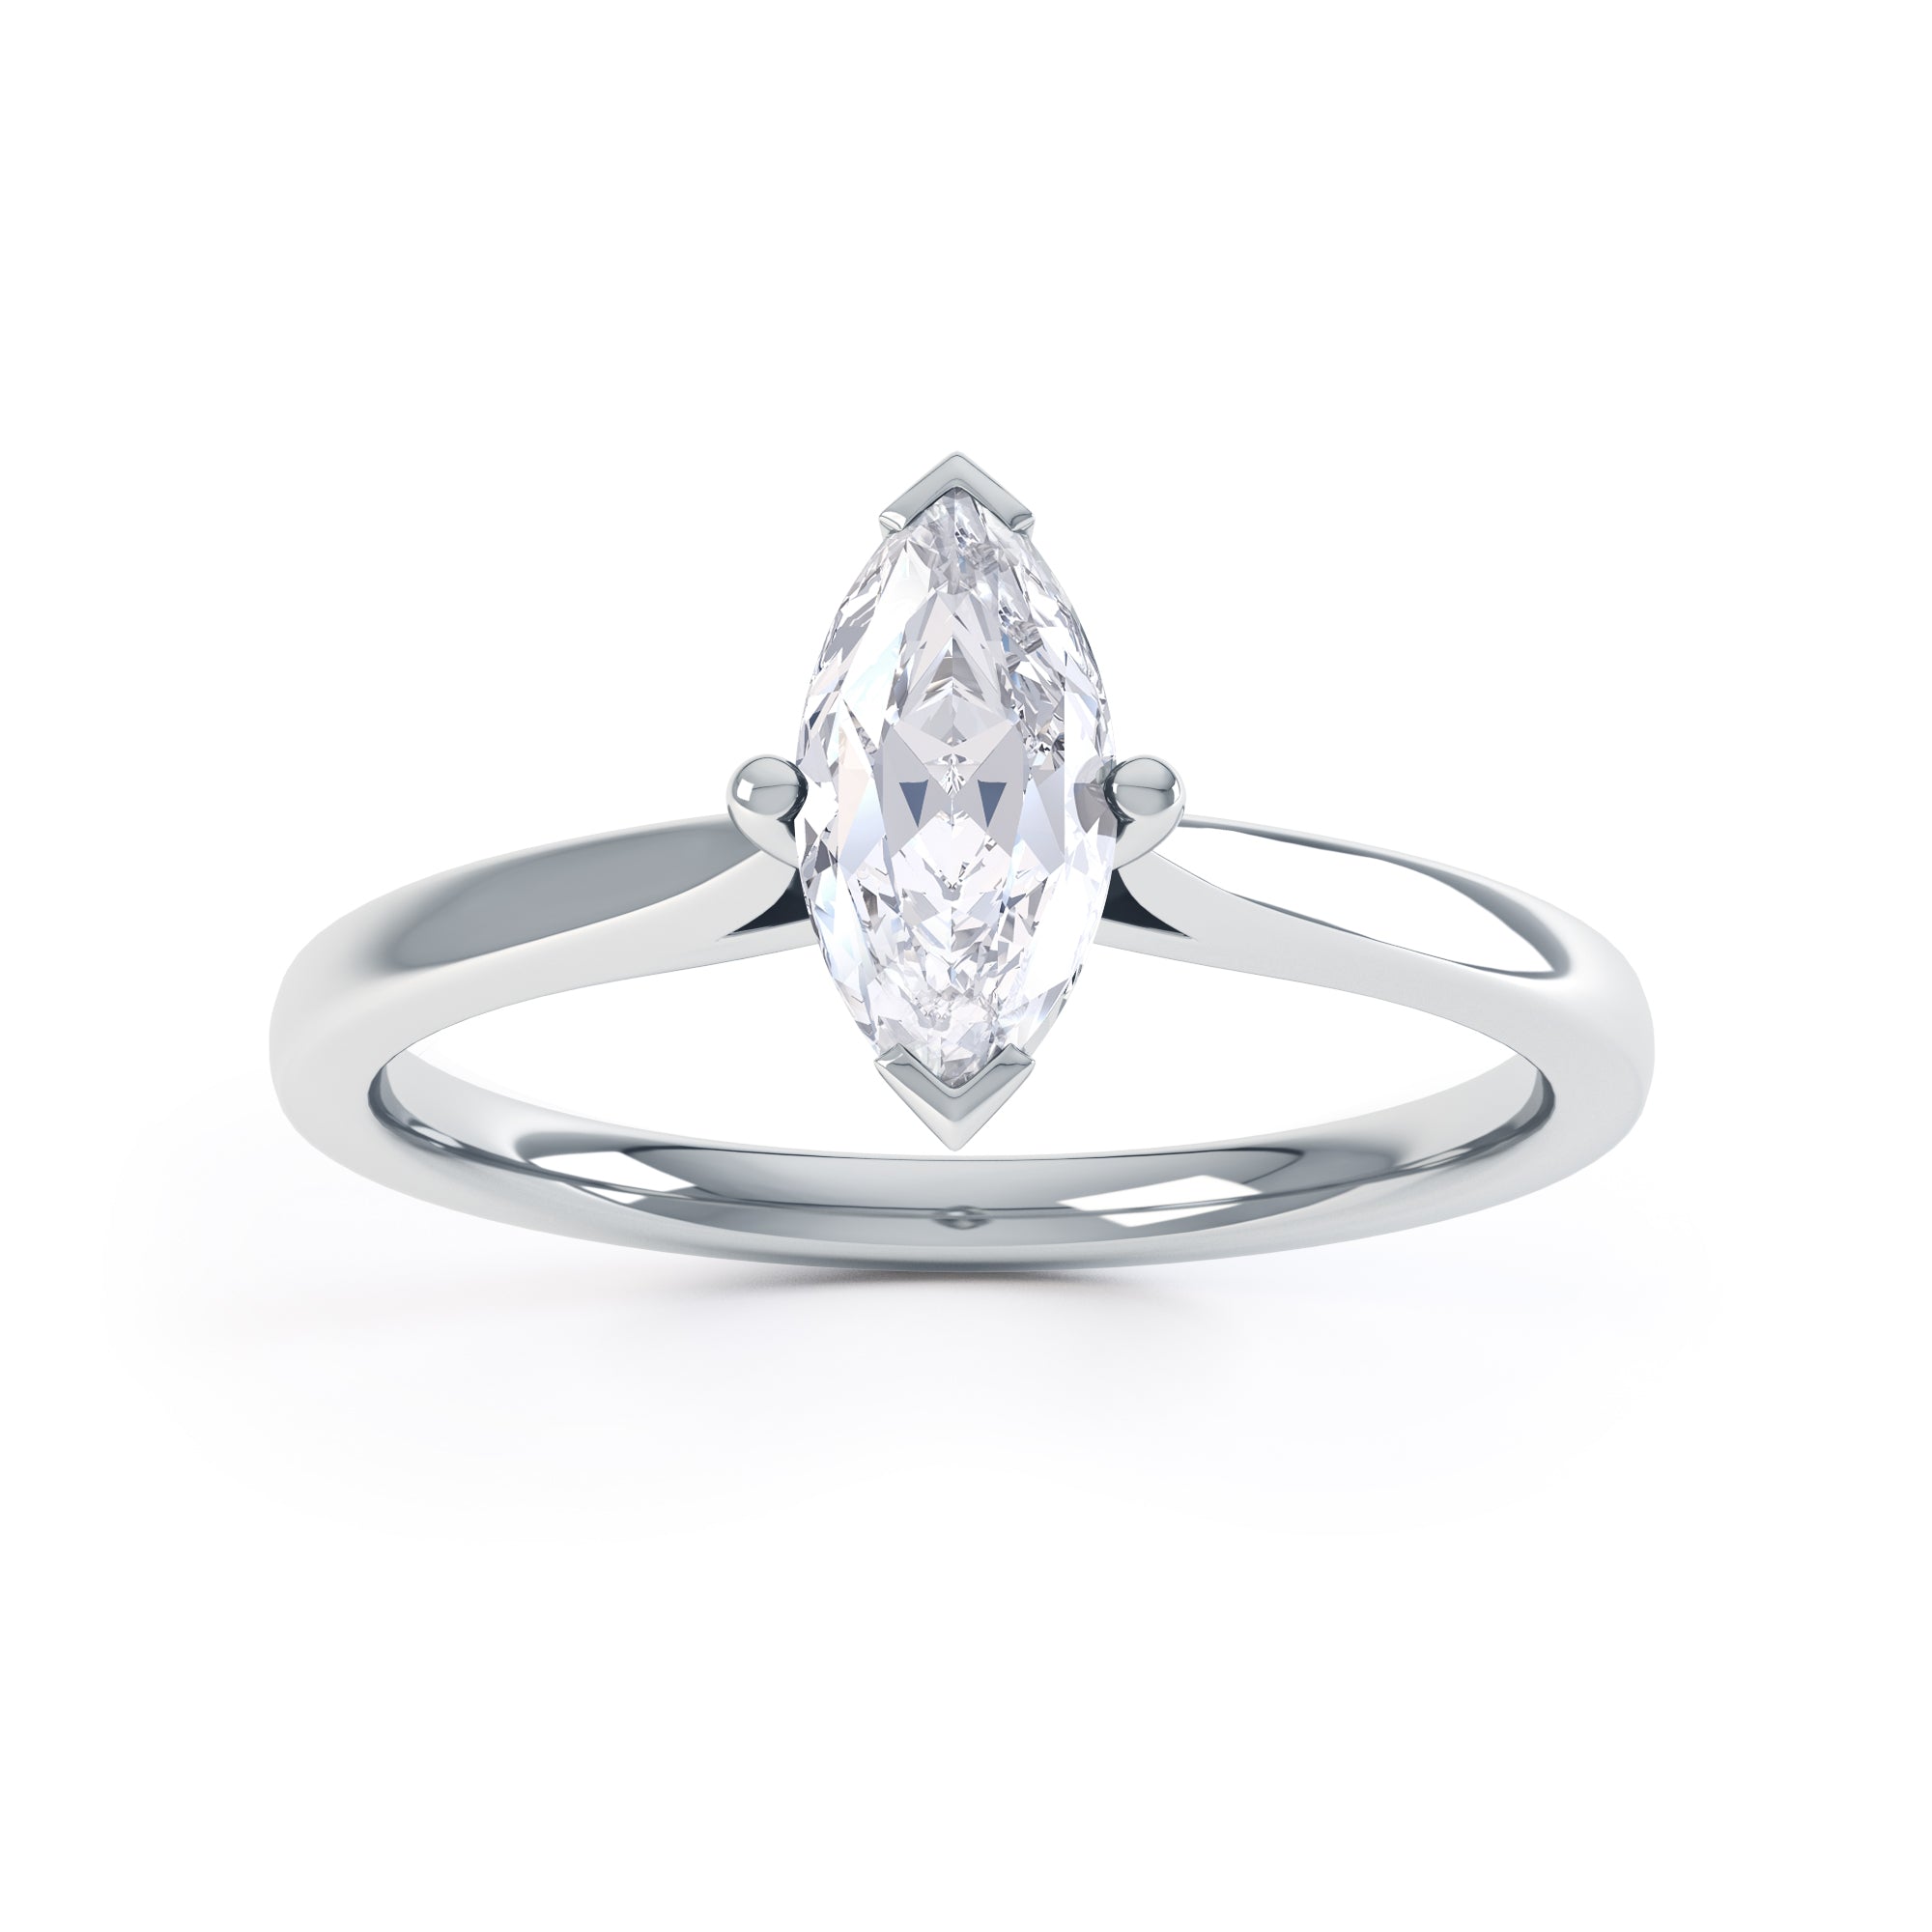 Marquise-Cut Centre Stone, V claws, Diamond Engagement Ring with Knife Edge Shoulders with cathedral setting